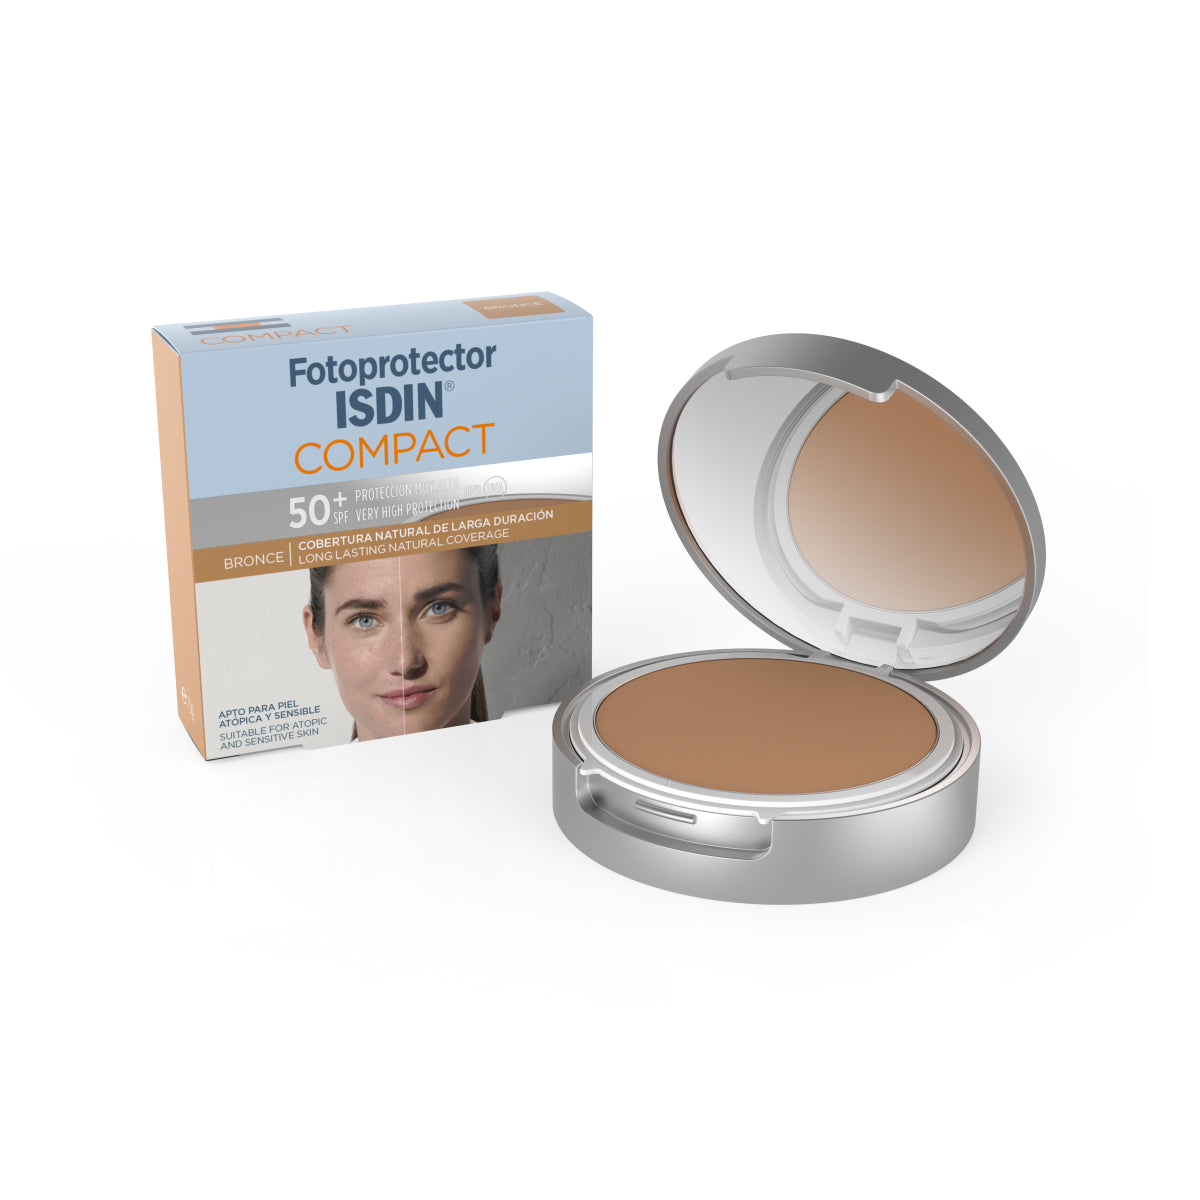 Fotoprotector Compacto Bronce SPF50+ 10g